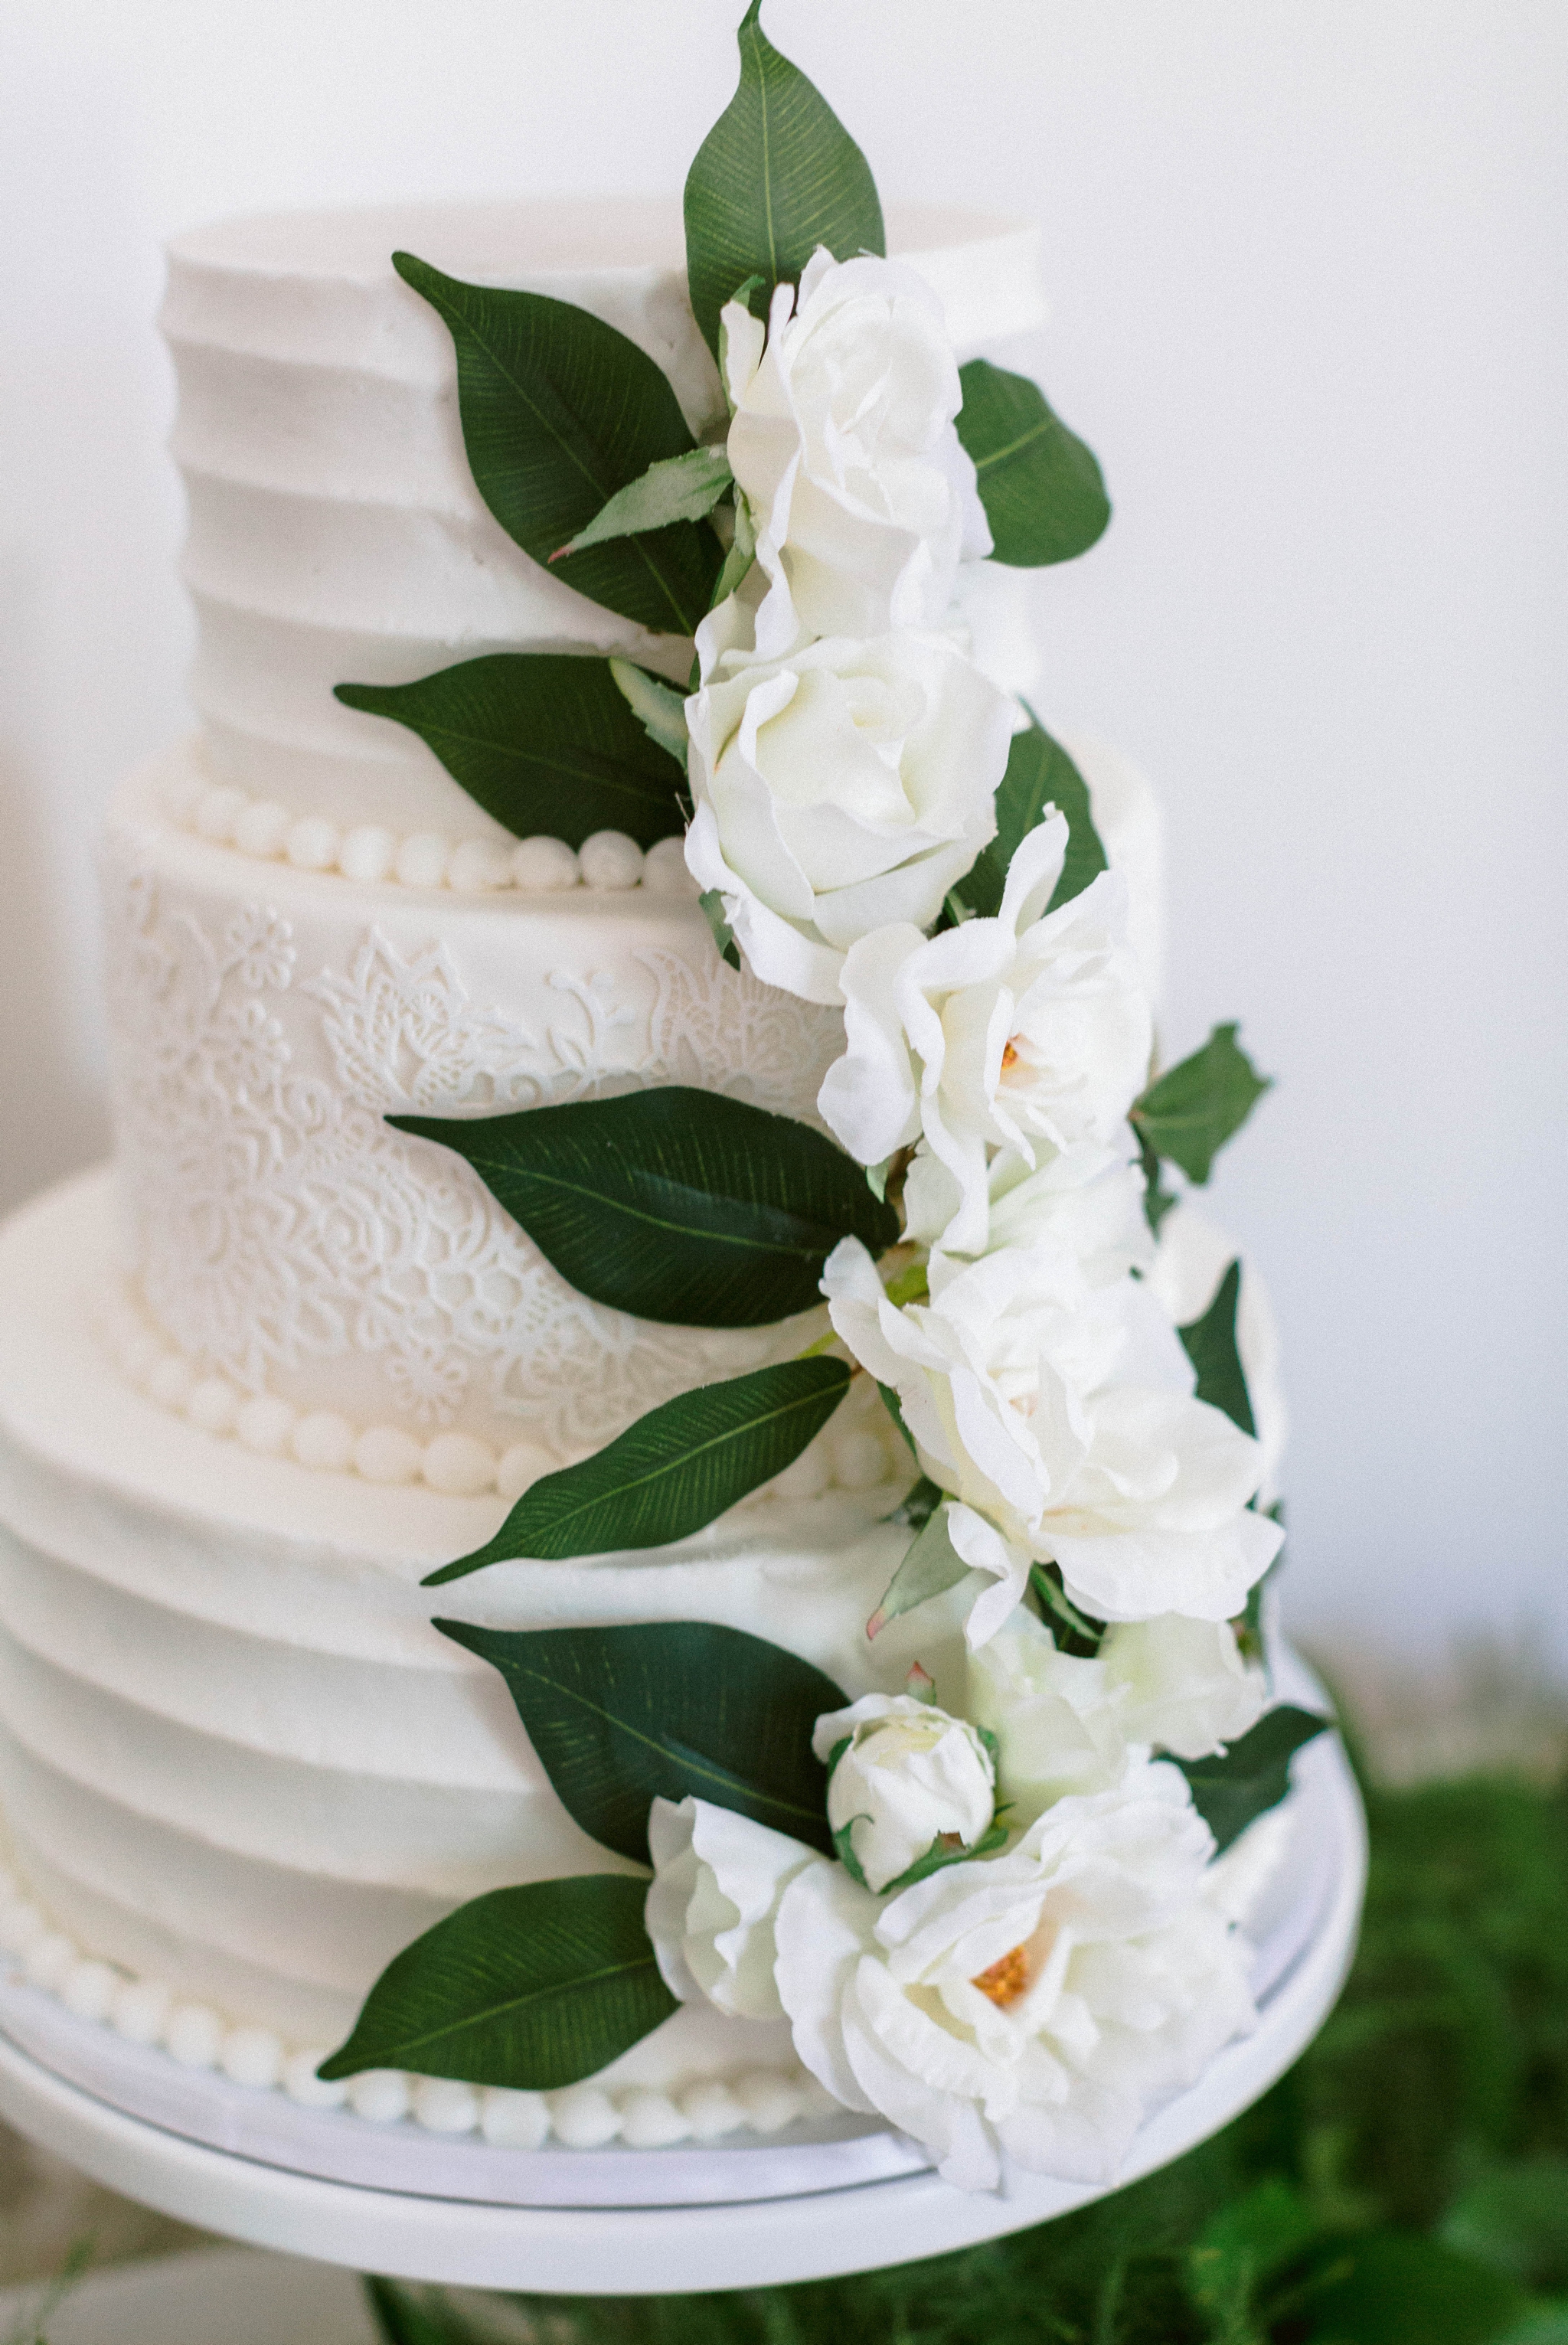  wedding  cake table on an all white antique dresser with an all white cake decorated with greenery - luxury cake table inspiration - honolulu oahu hawaii wedding photographer - johanna dye photography 